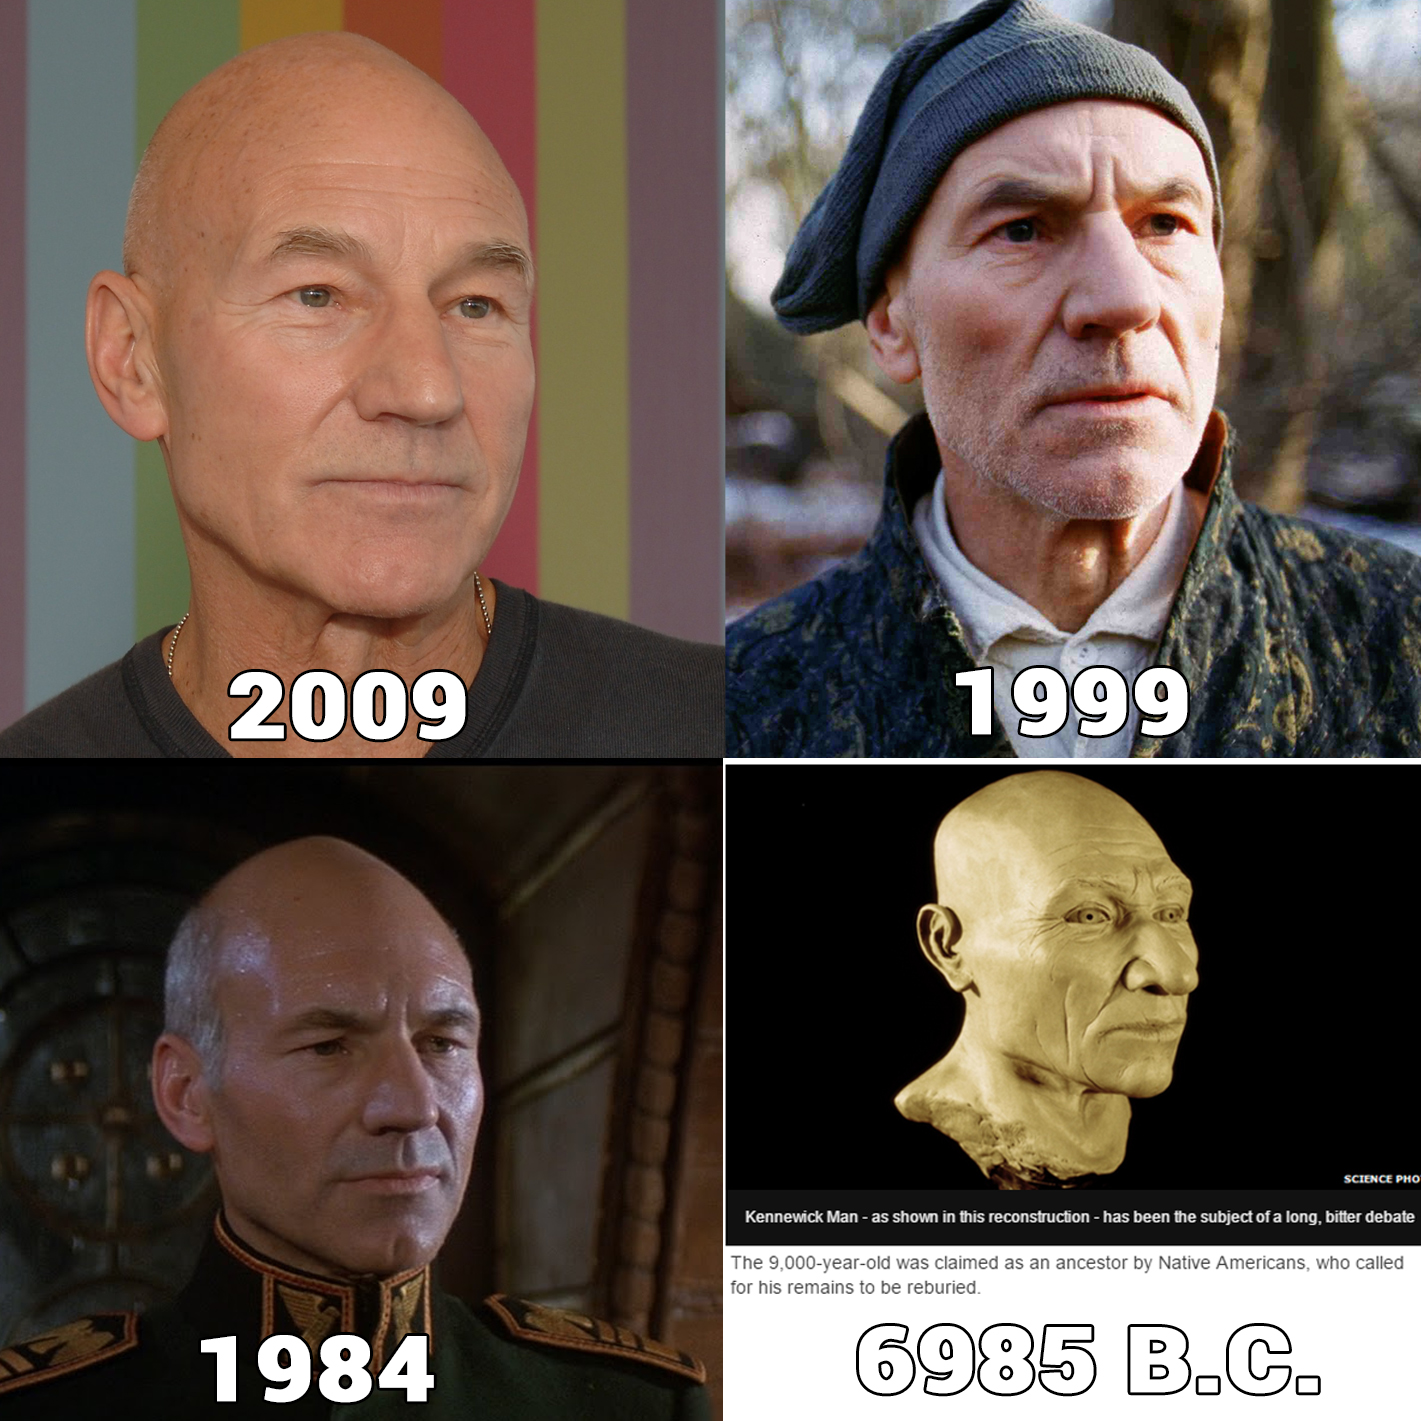 Further proof of Patrick Stewart's immortality